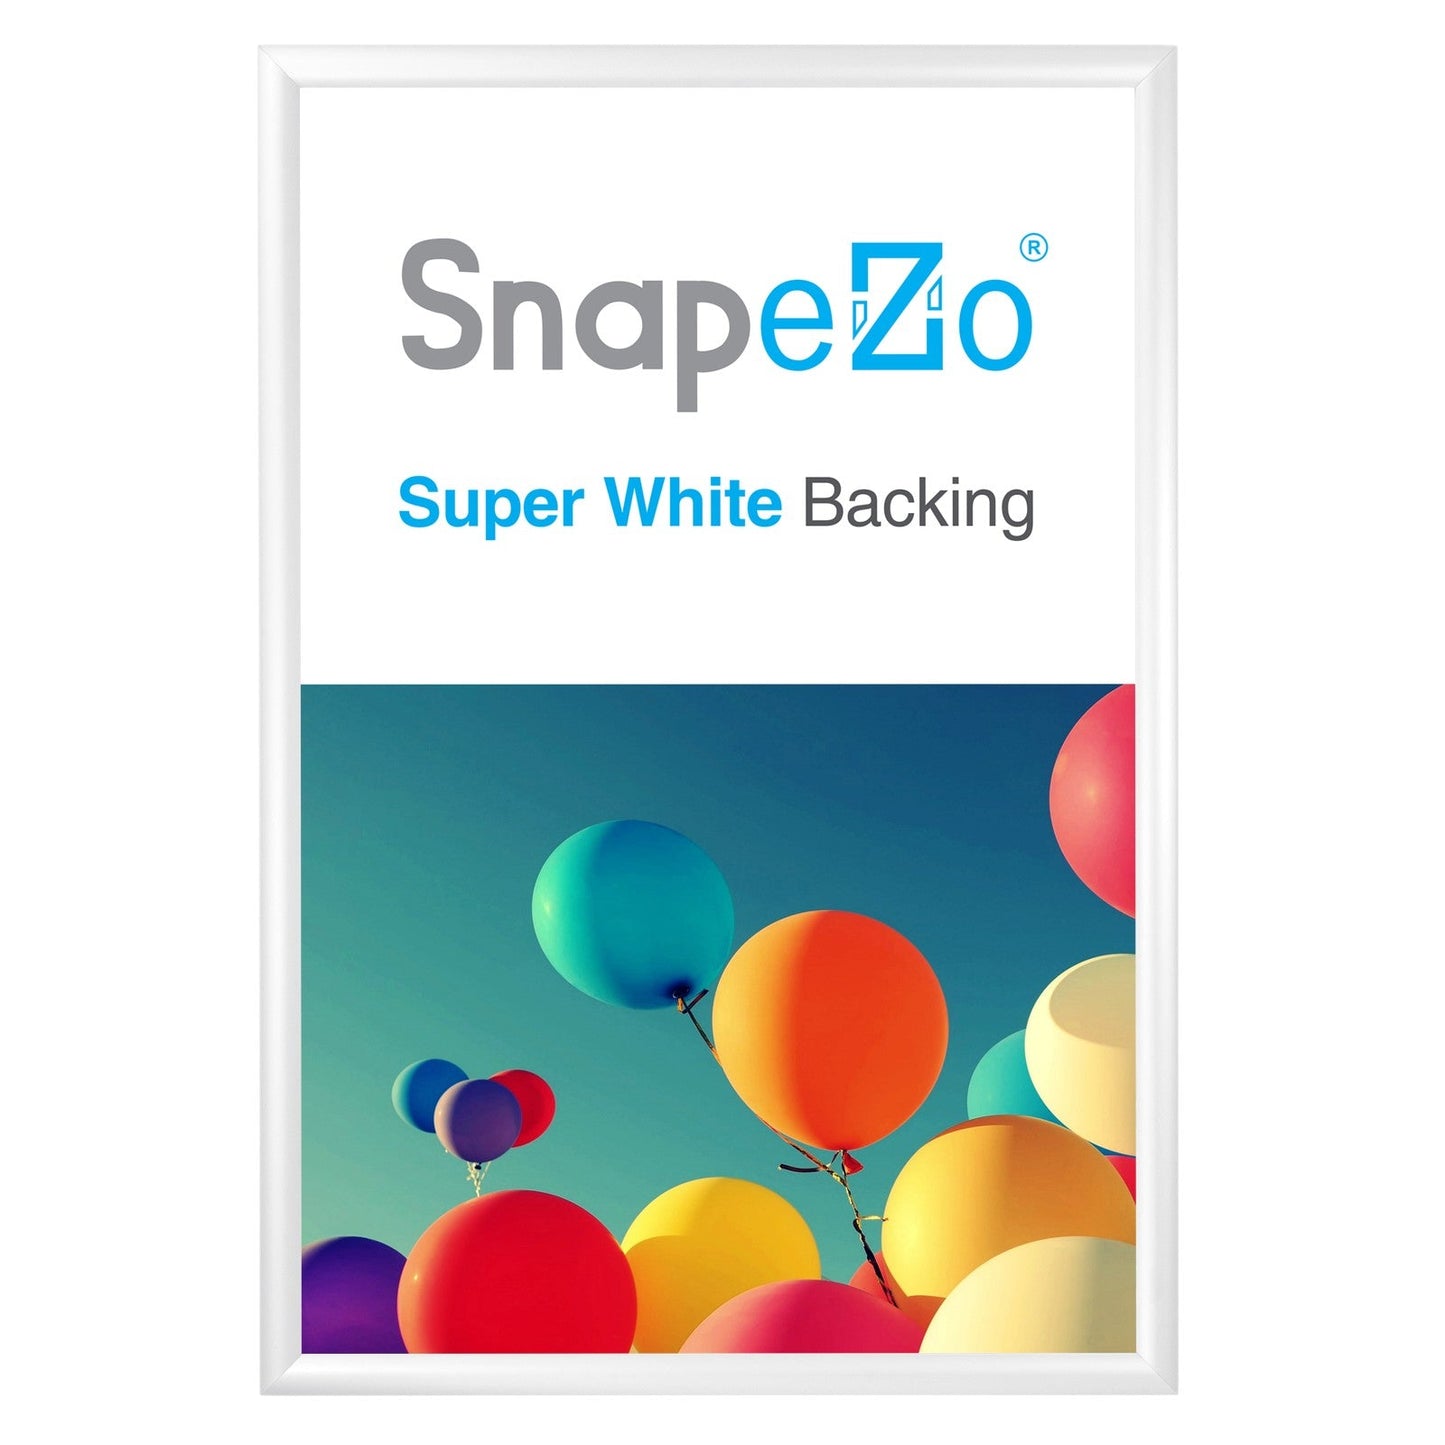 Load image into Gallery viewer, 25x37 White SnapeZo® Snap Frame - 1.2&amp;quot; Profile
